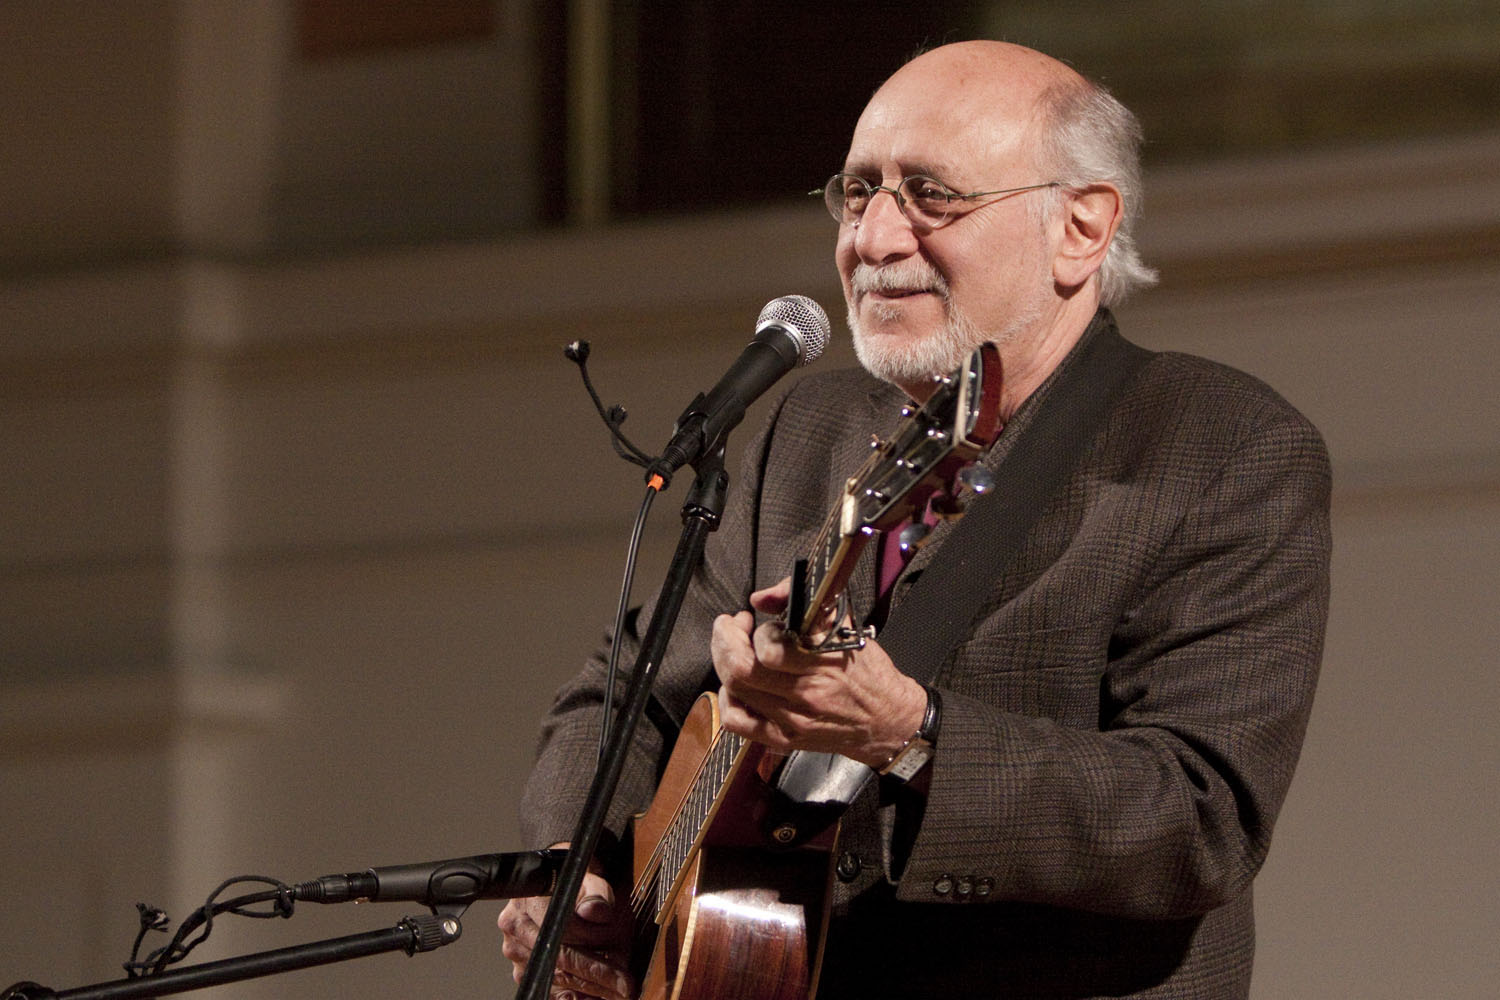 Peter Yarrow Quote: “People may say 'What can I do? I'm only one person.'  But we've proven that when we come together demonstrate, and speak ”